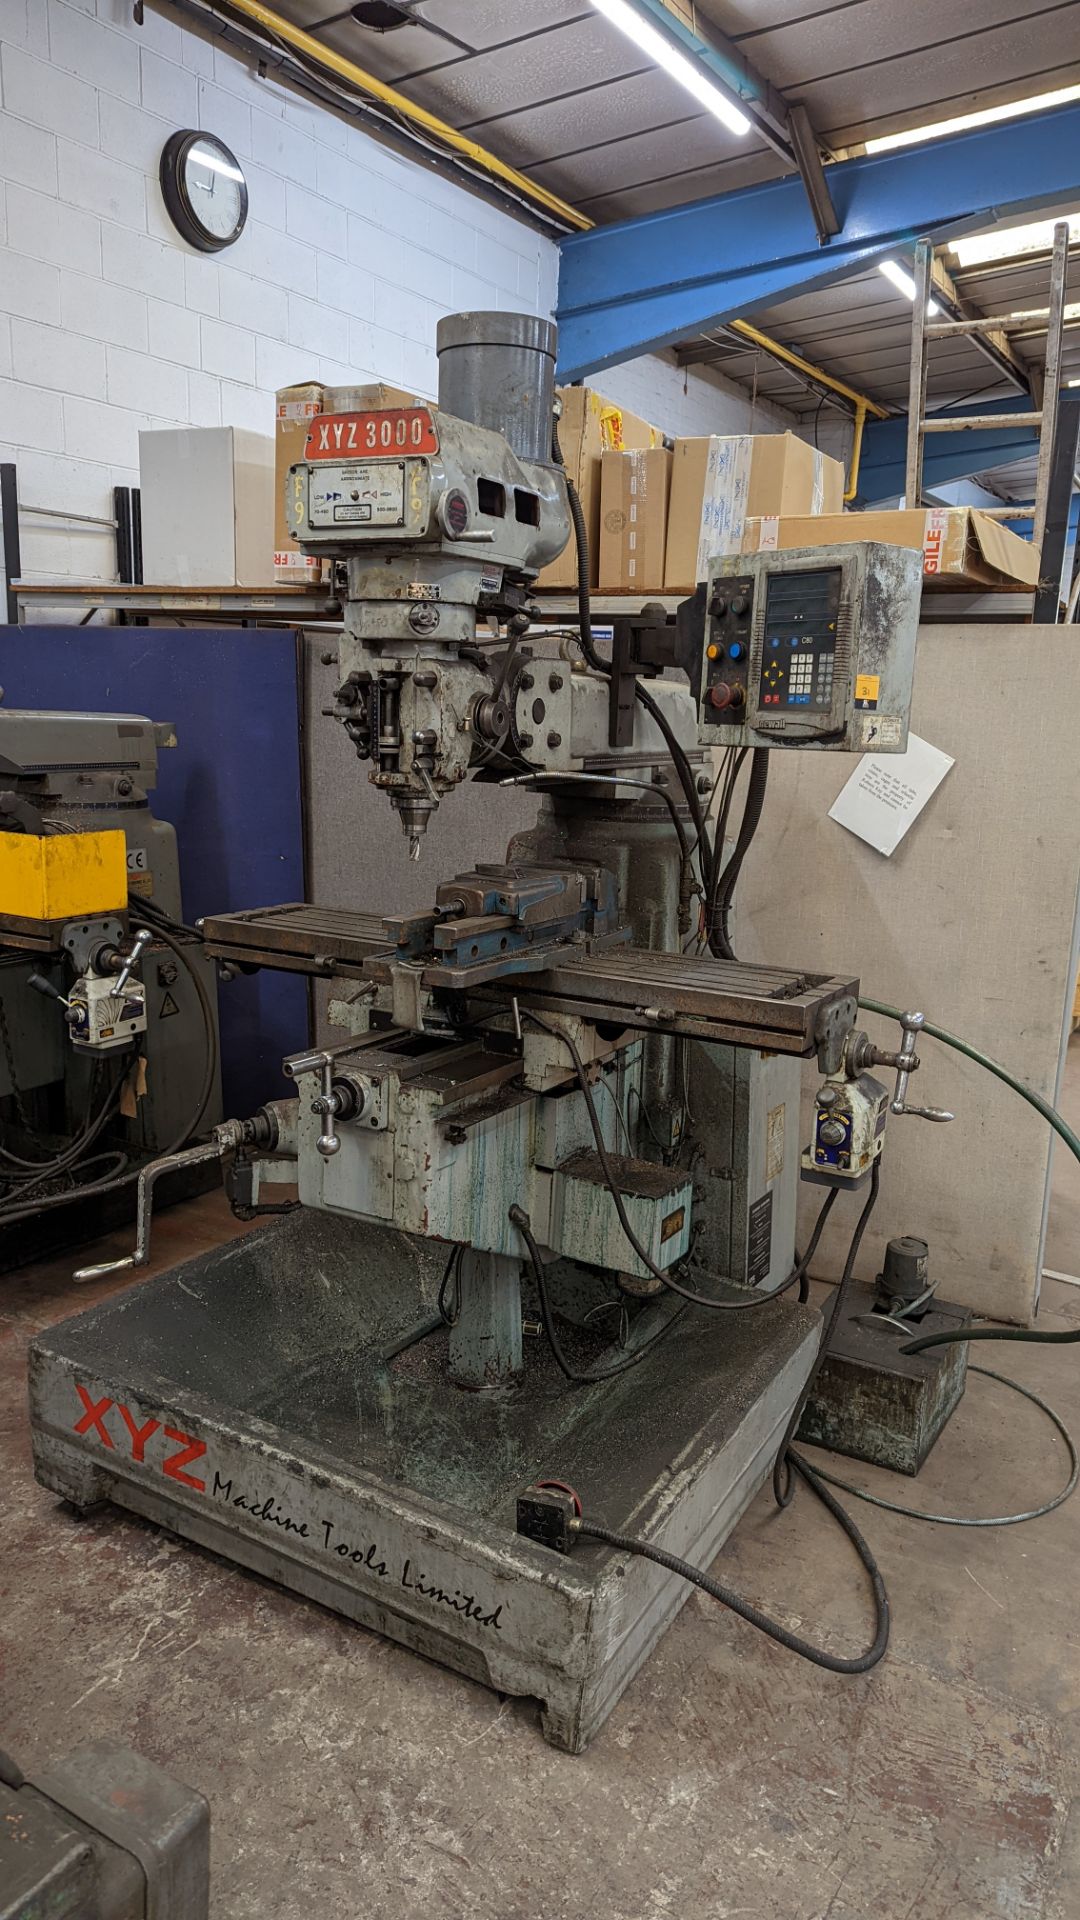 XYZ 3000 KR-V3000 turret mill with Newell DRO & Align CE-500S power feed